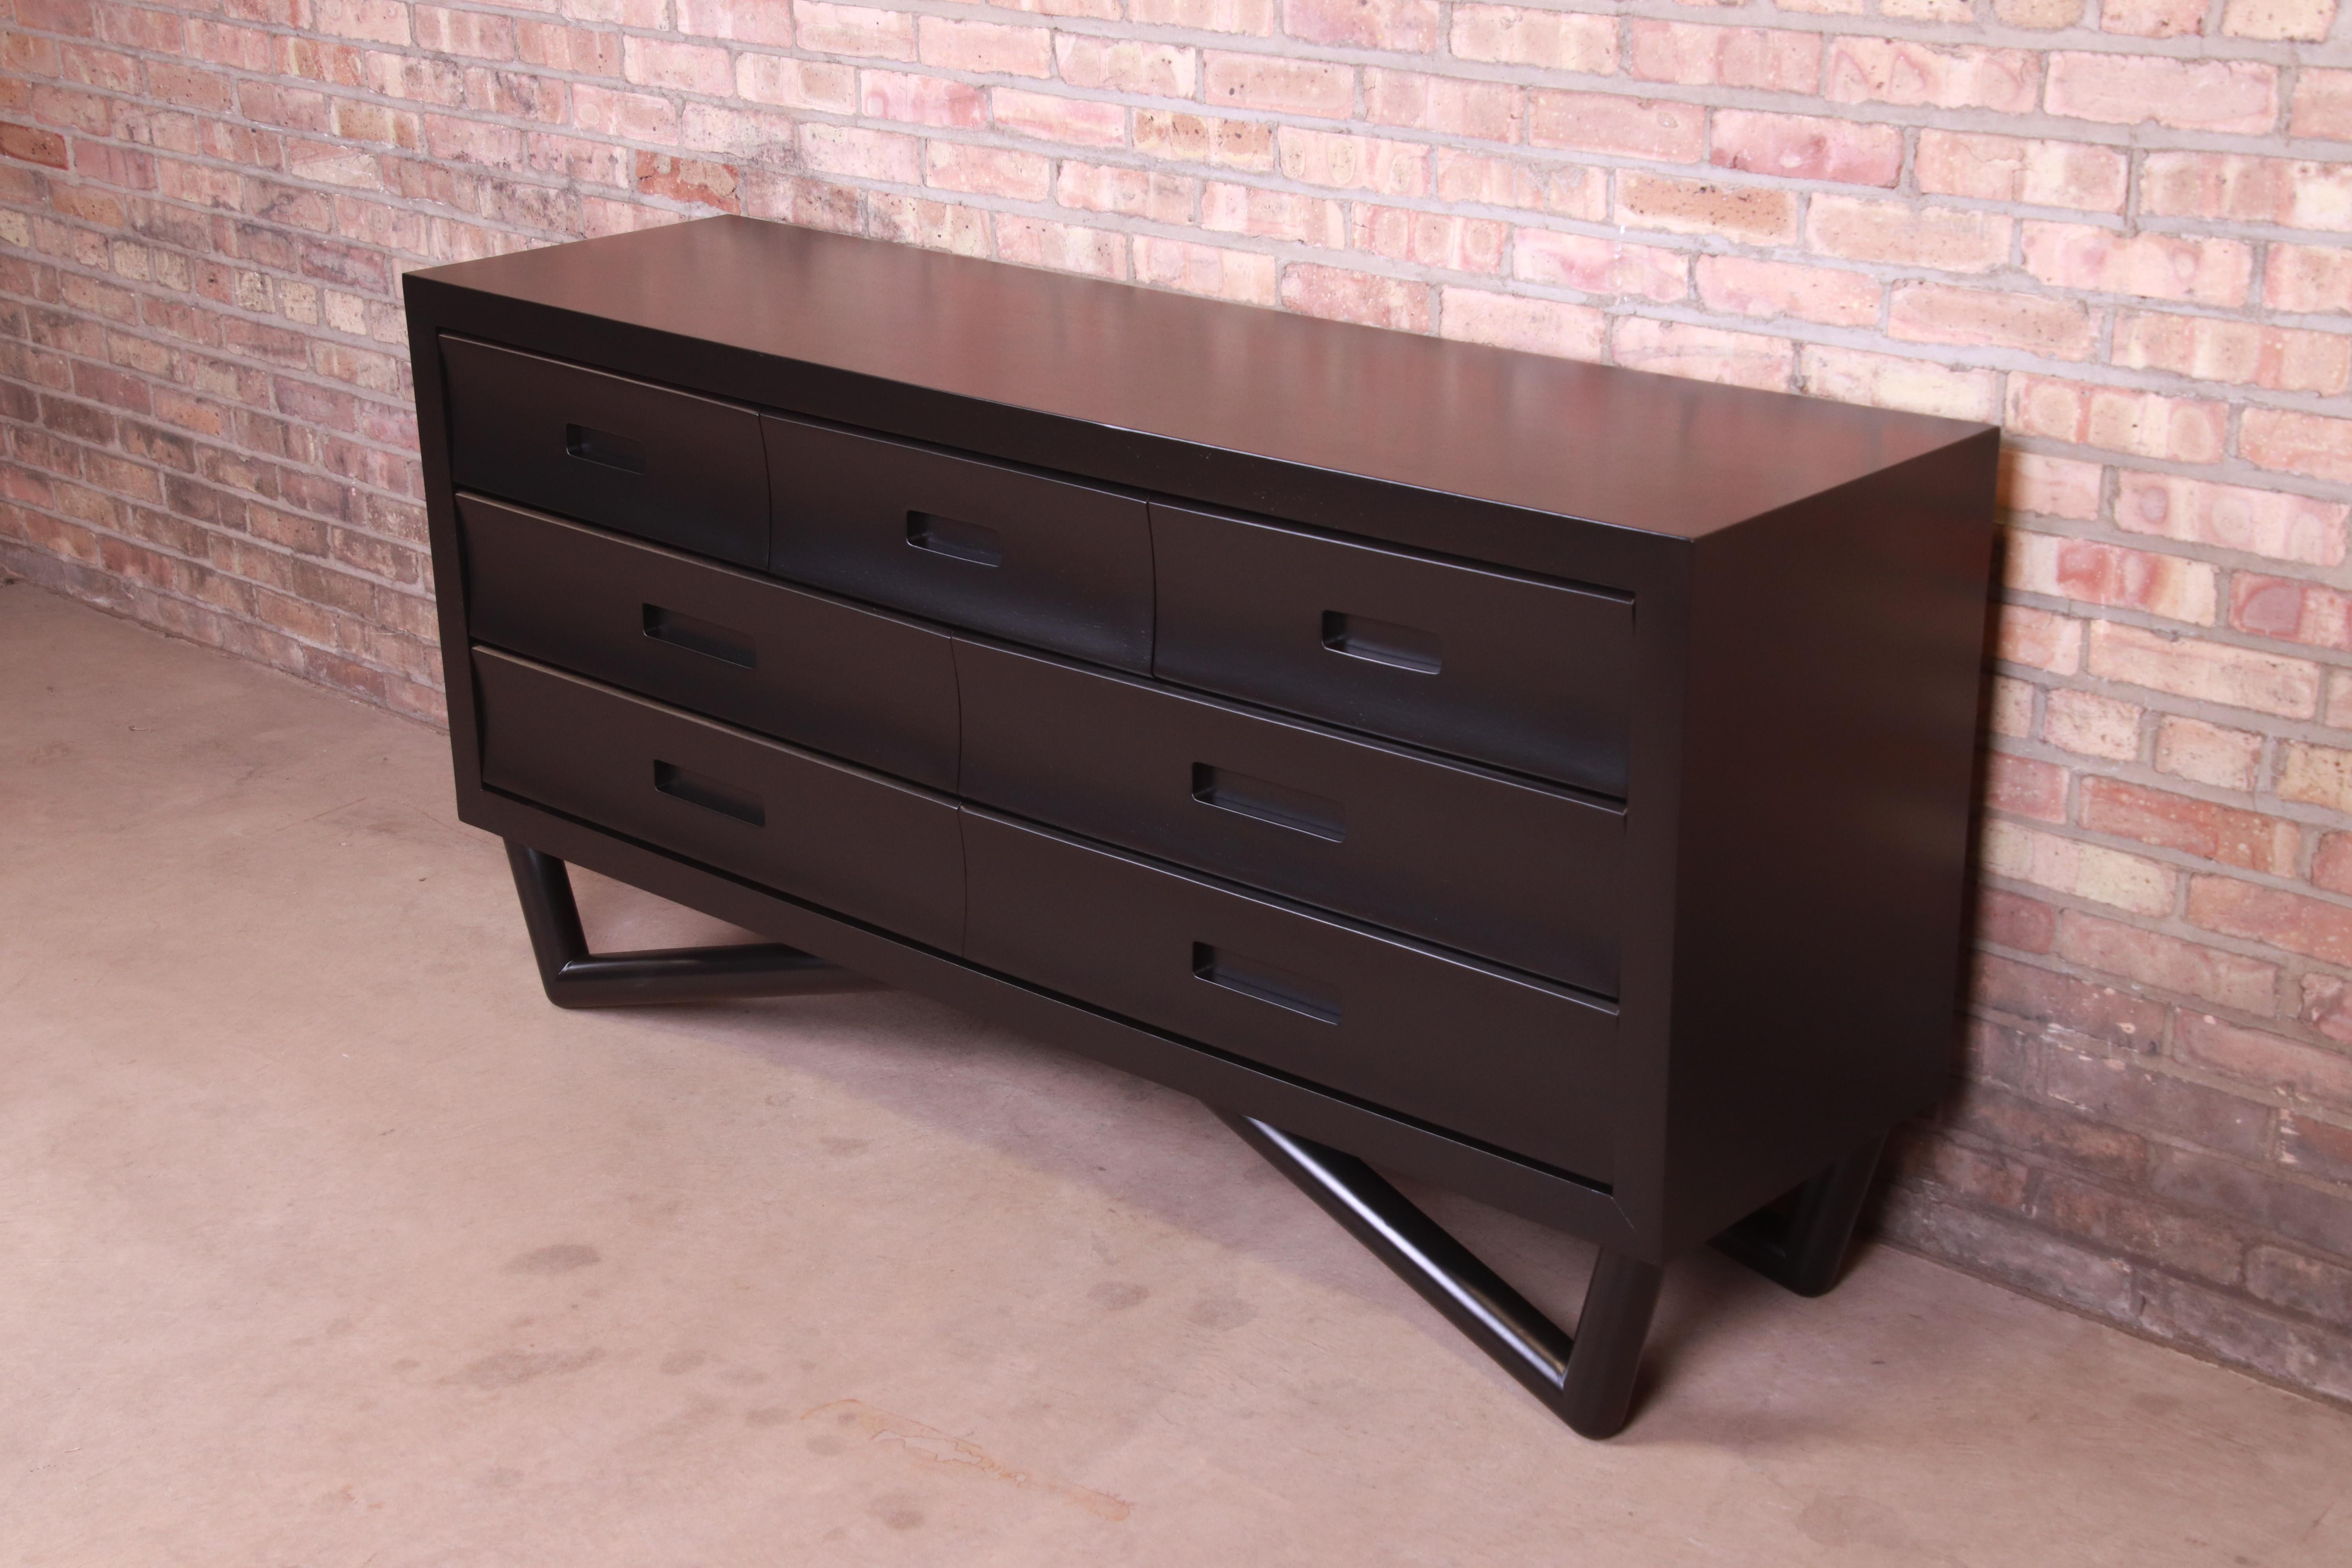 20th Century Mid-Century Modern Black Lacquered Long Dresser or Credenza, Newly Refinished